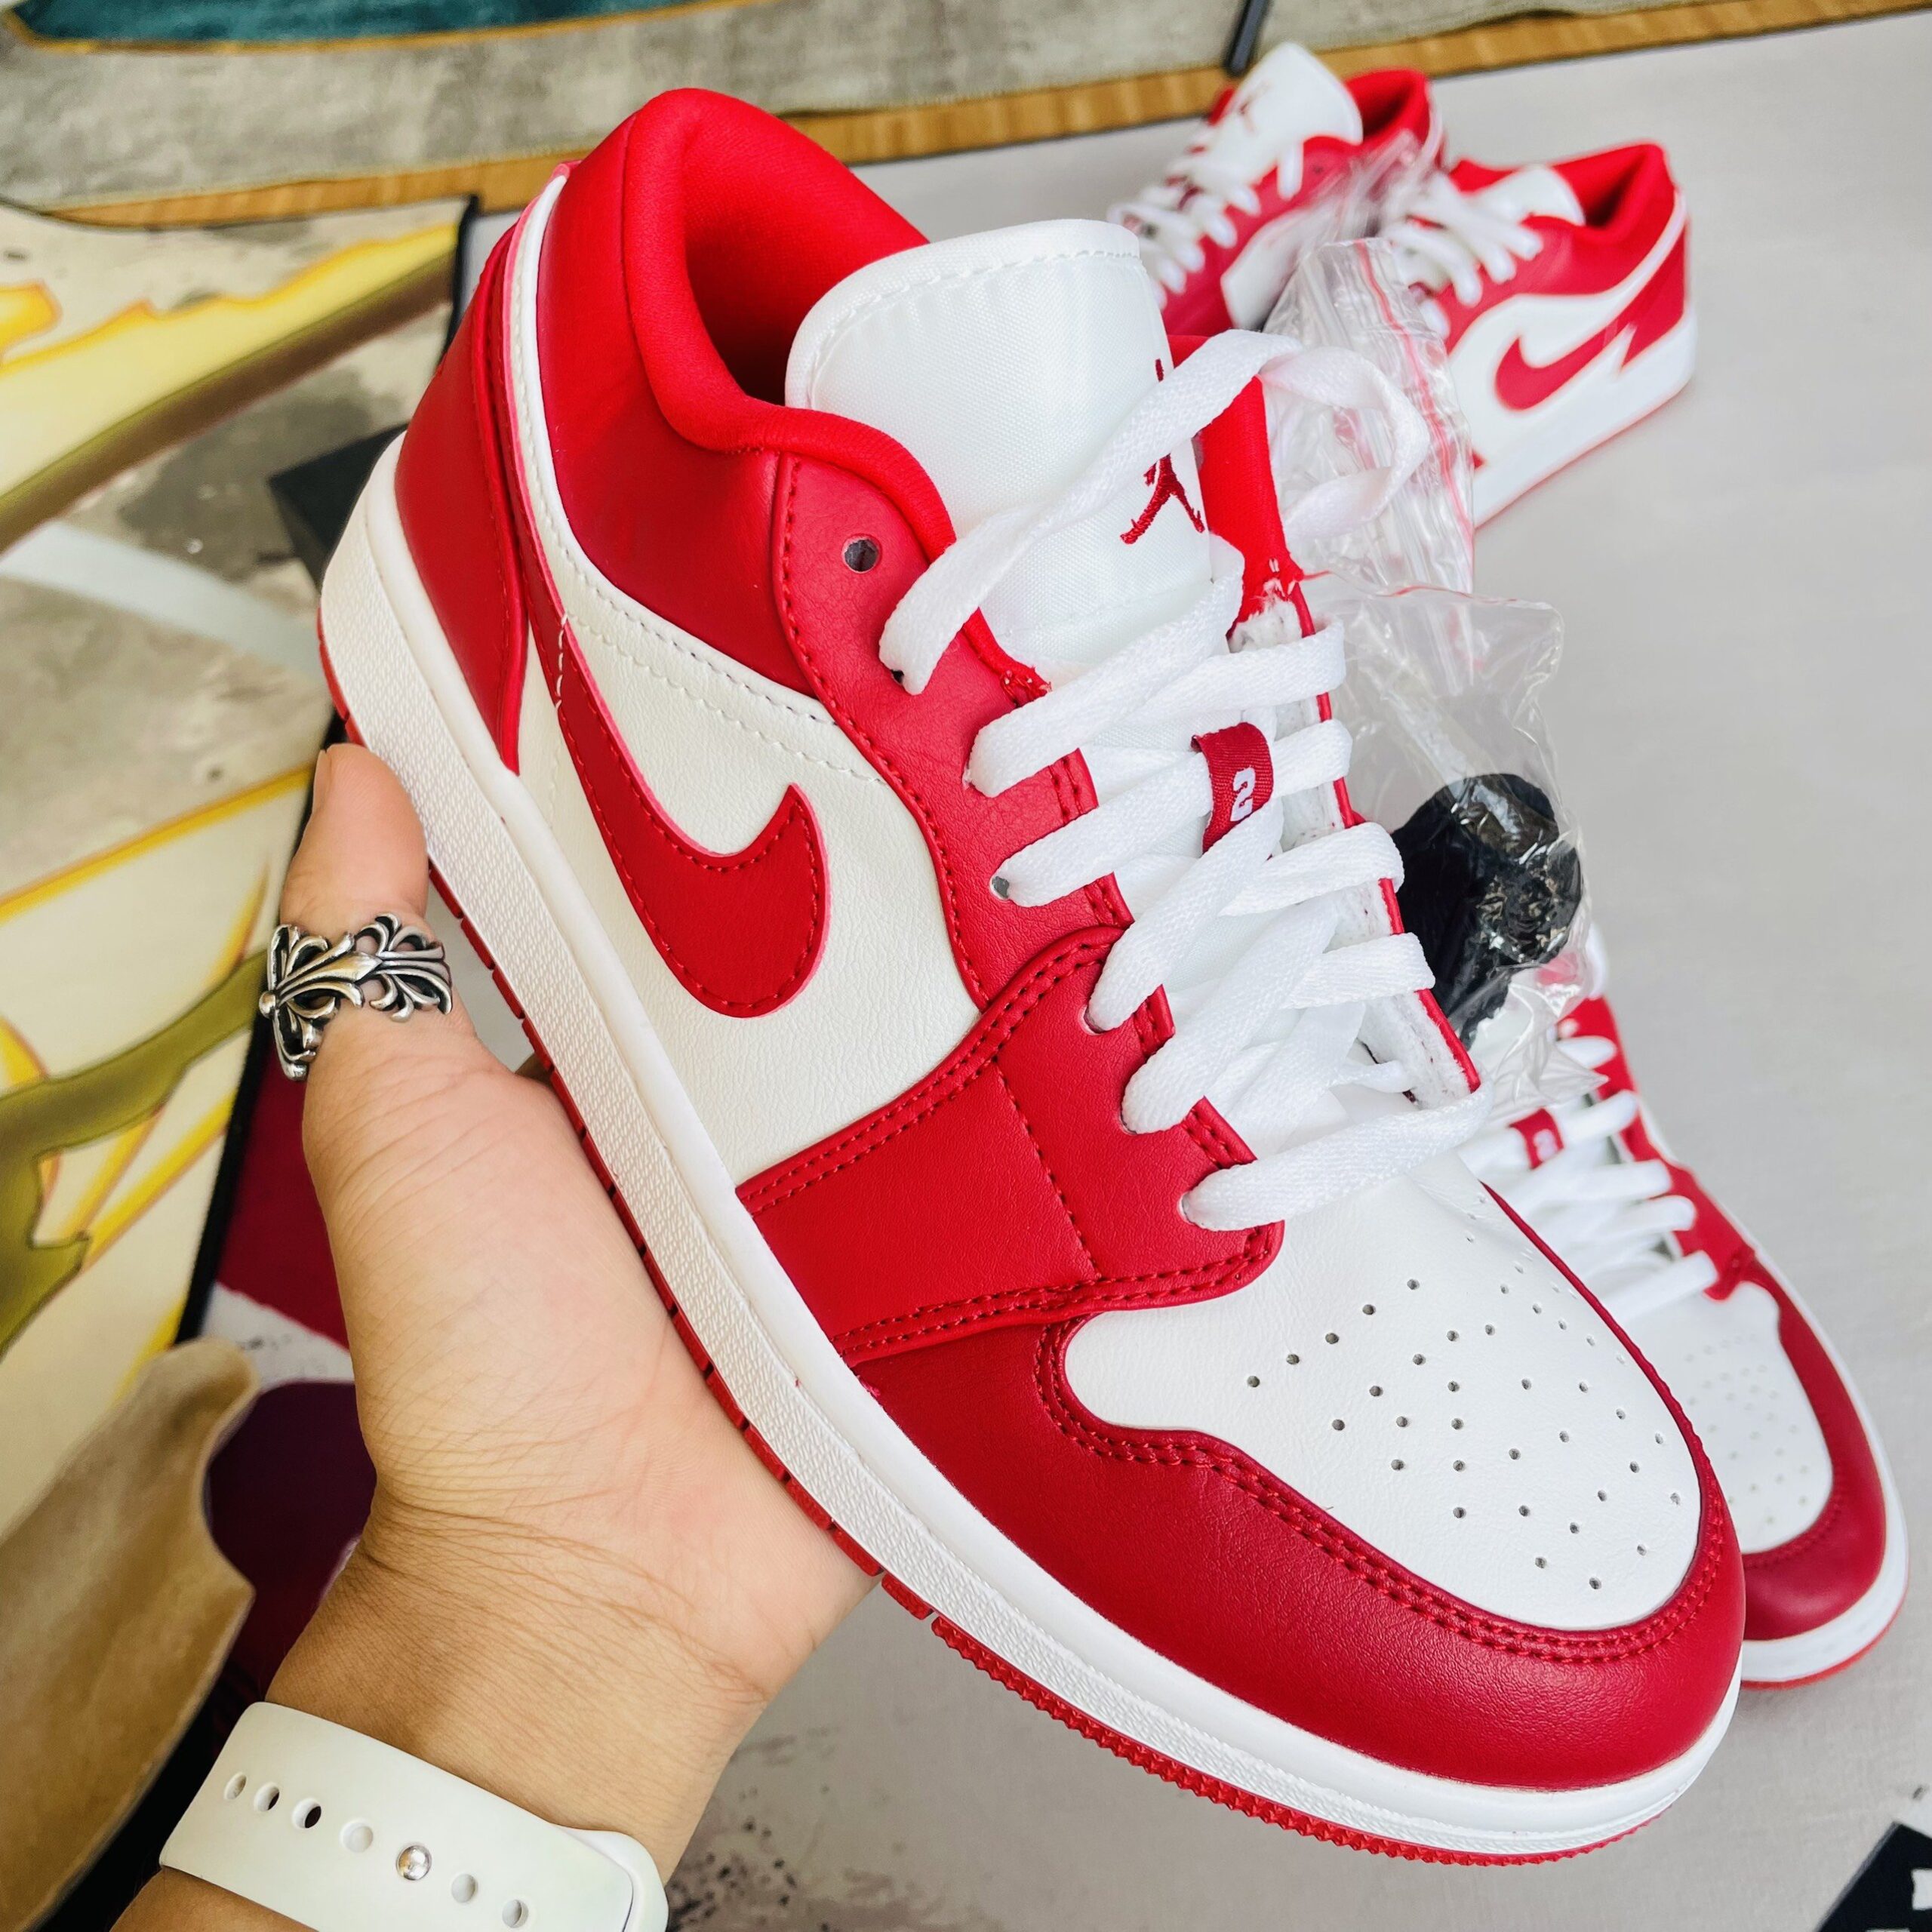 giay nike air Jordan 1 low gym red white like auth 4 scaled